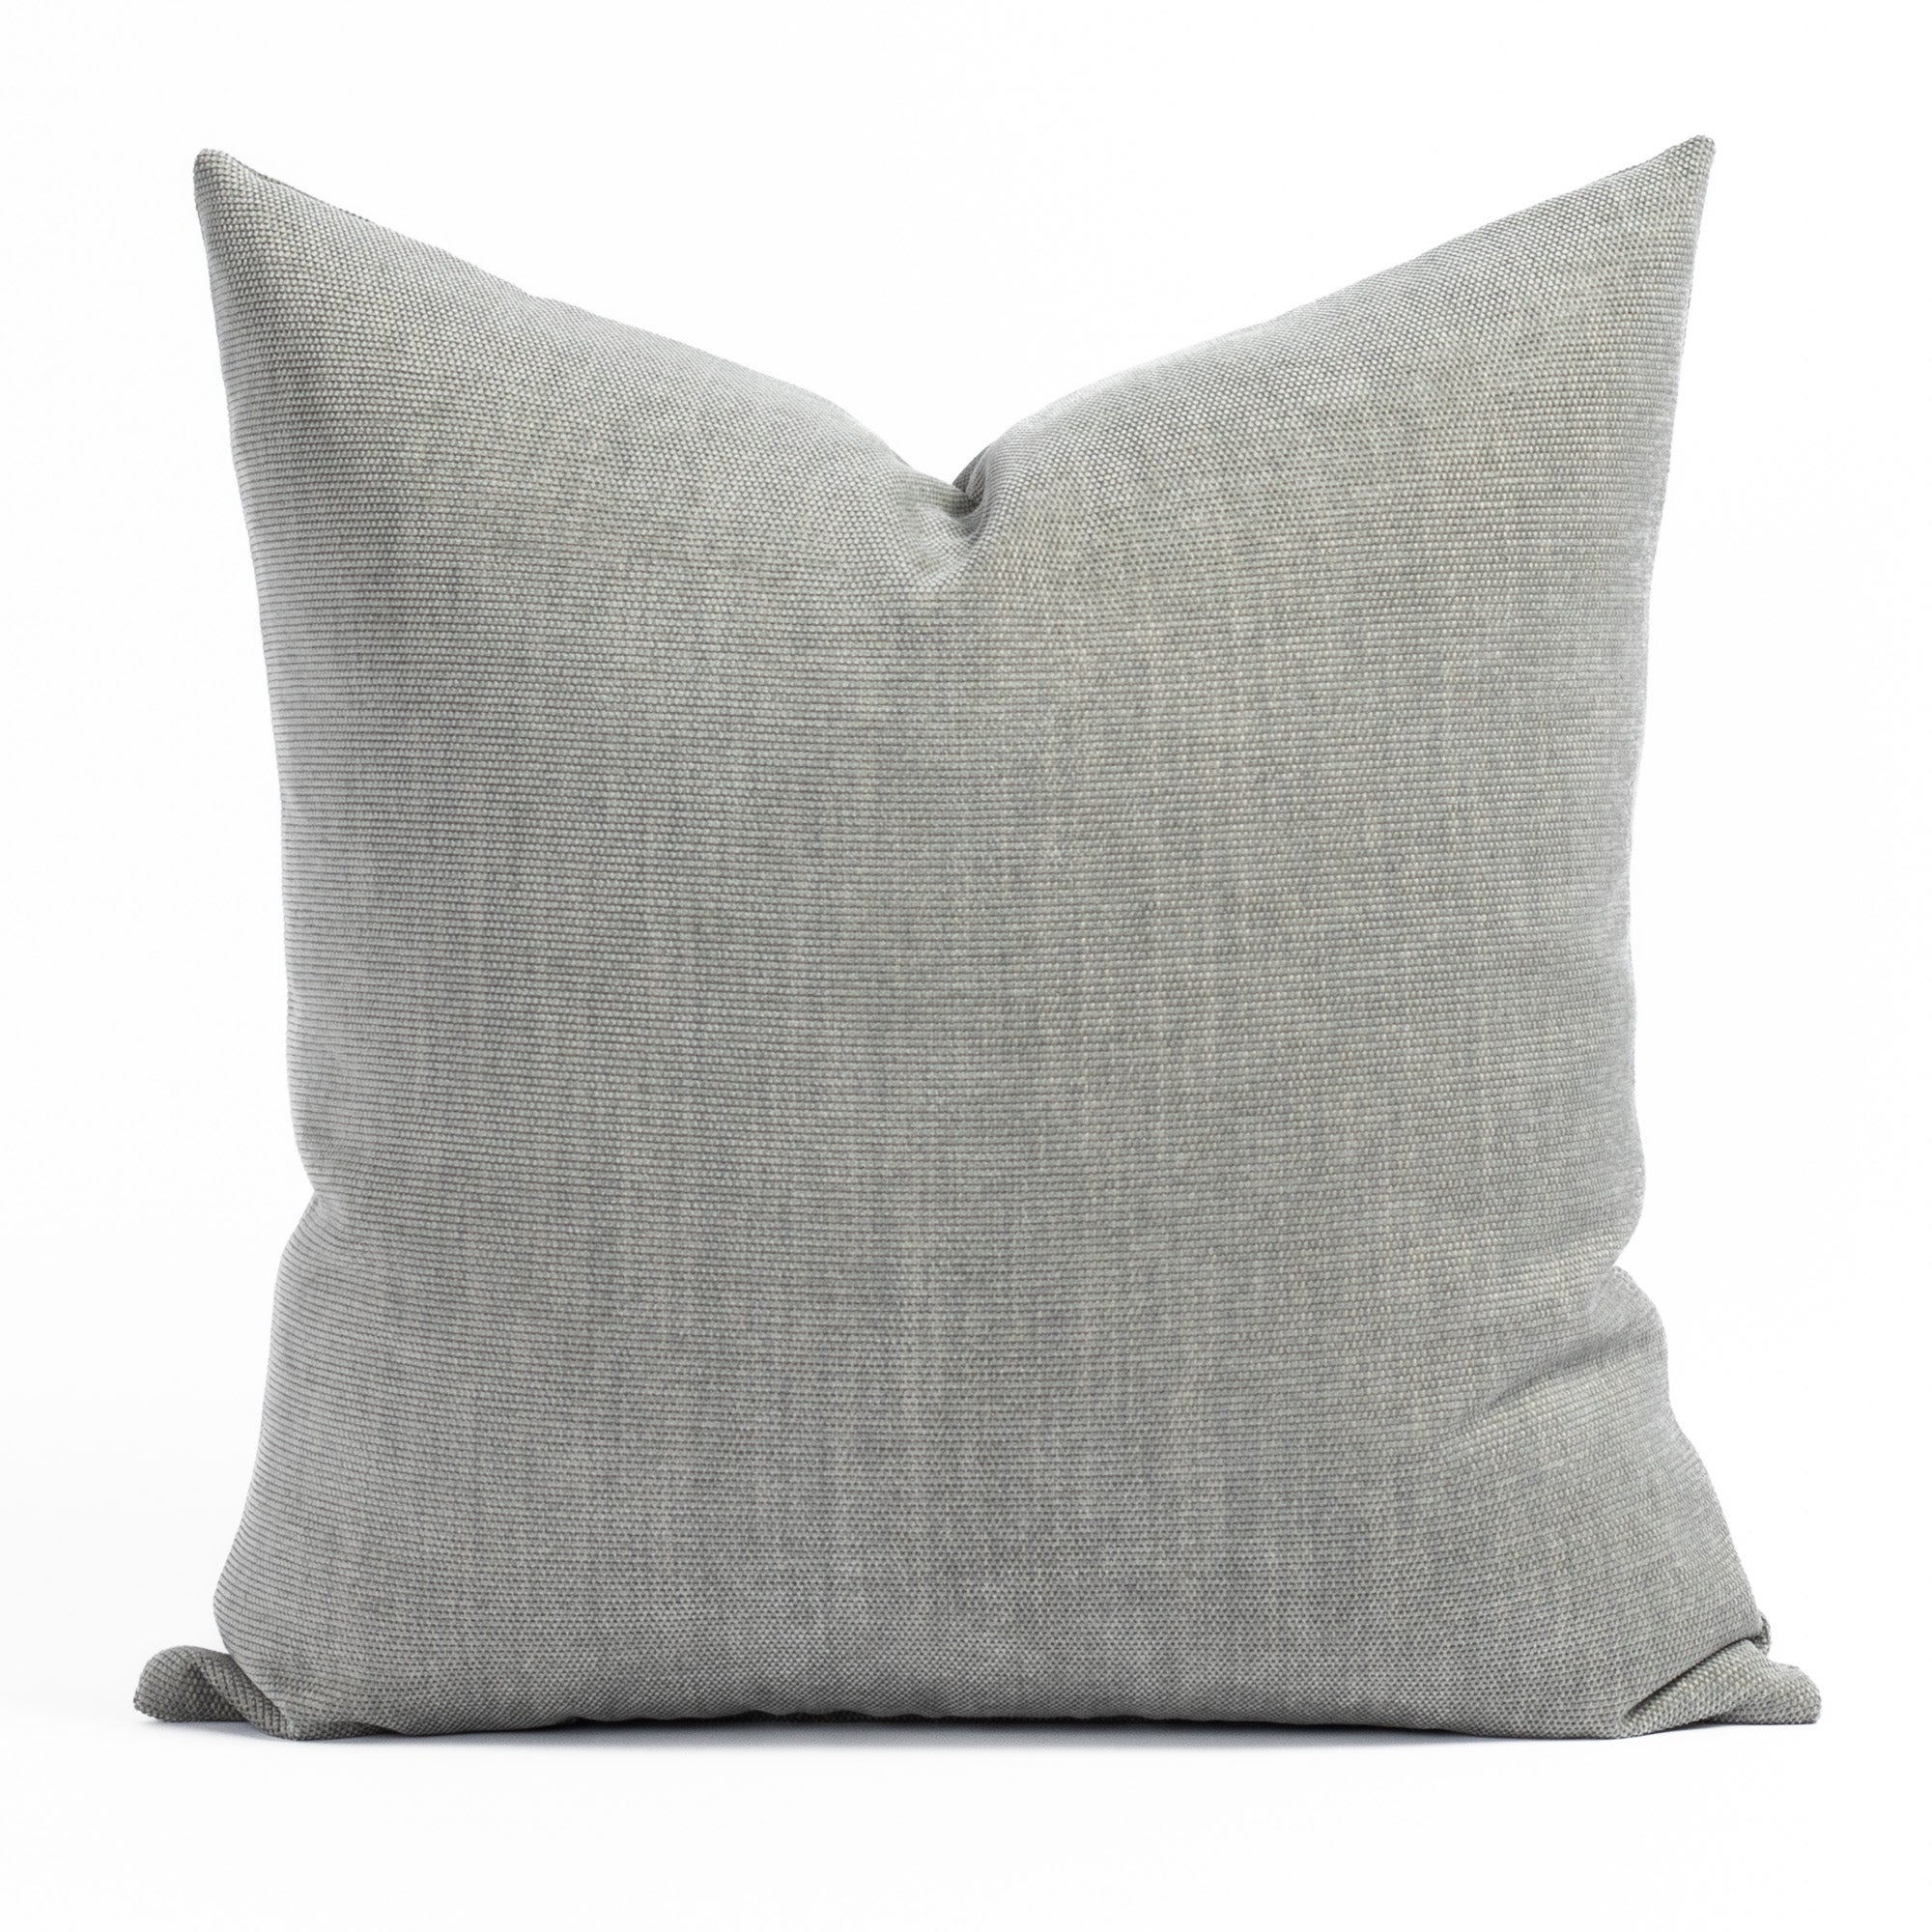 Remy Silver Lake 22x22 Pillow, a soft light gray pillow from Tonic Living